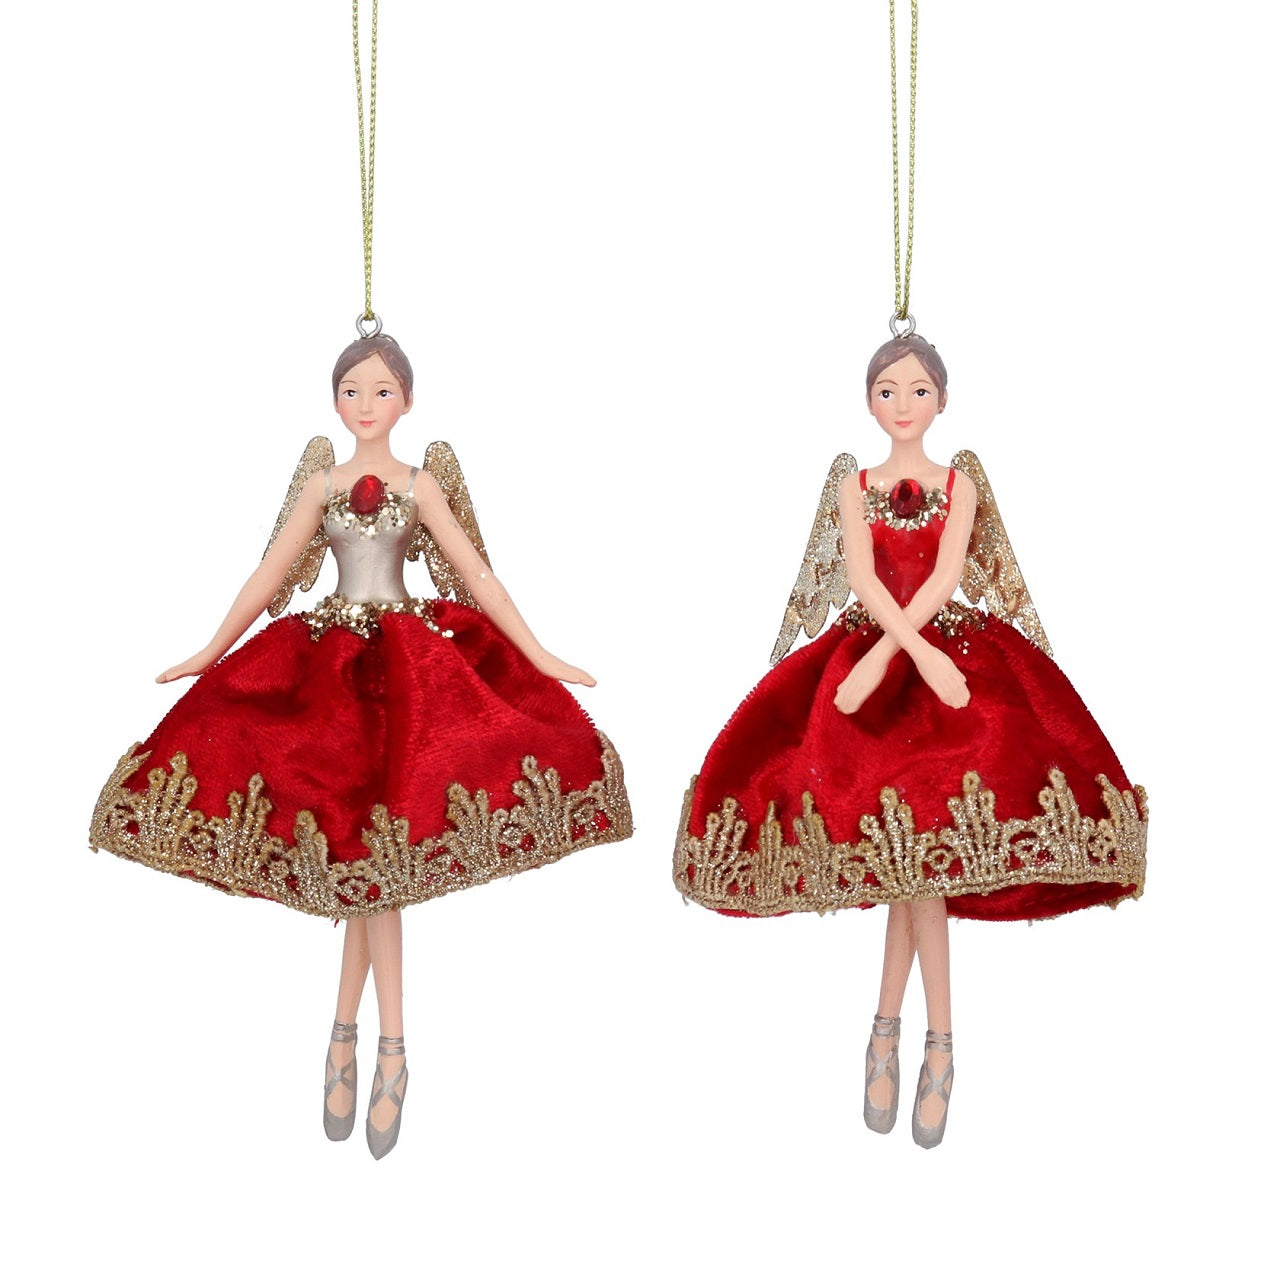 Gisela Graham Red & Gold Fabric Fairy Hanging Decoration - Gold Top  Browse our beautiful range of luxury Christmas tree decorations and ornaments for your tree this Christmas.  Add style to your Christmas tree with this elegant Christmas fairy in red fabric dress decorated with gold trim and red stone.